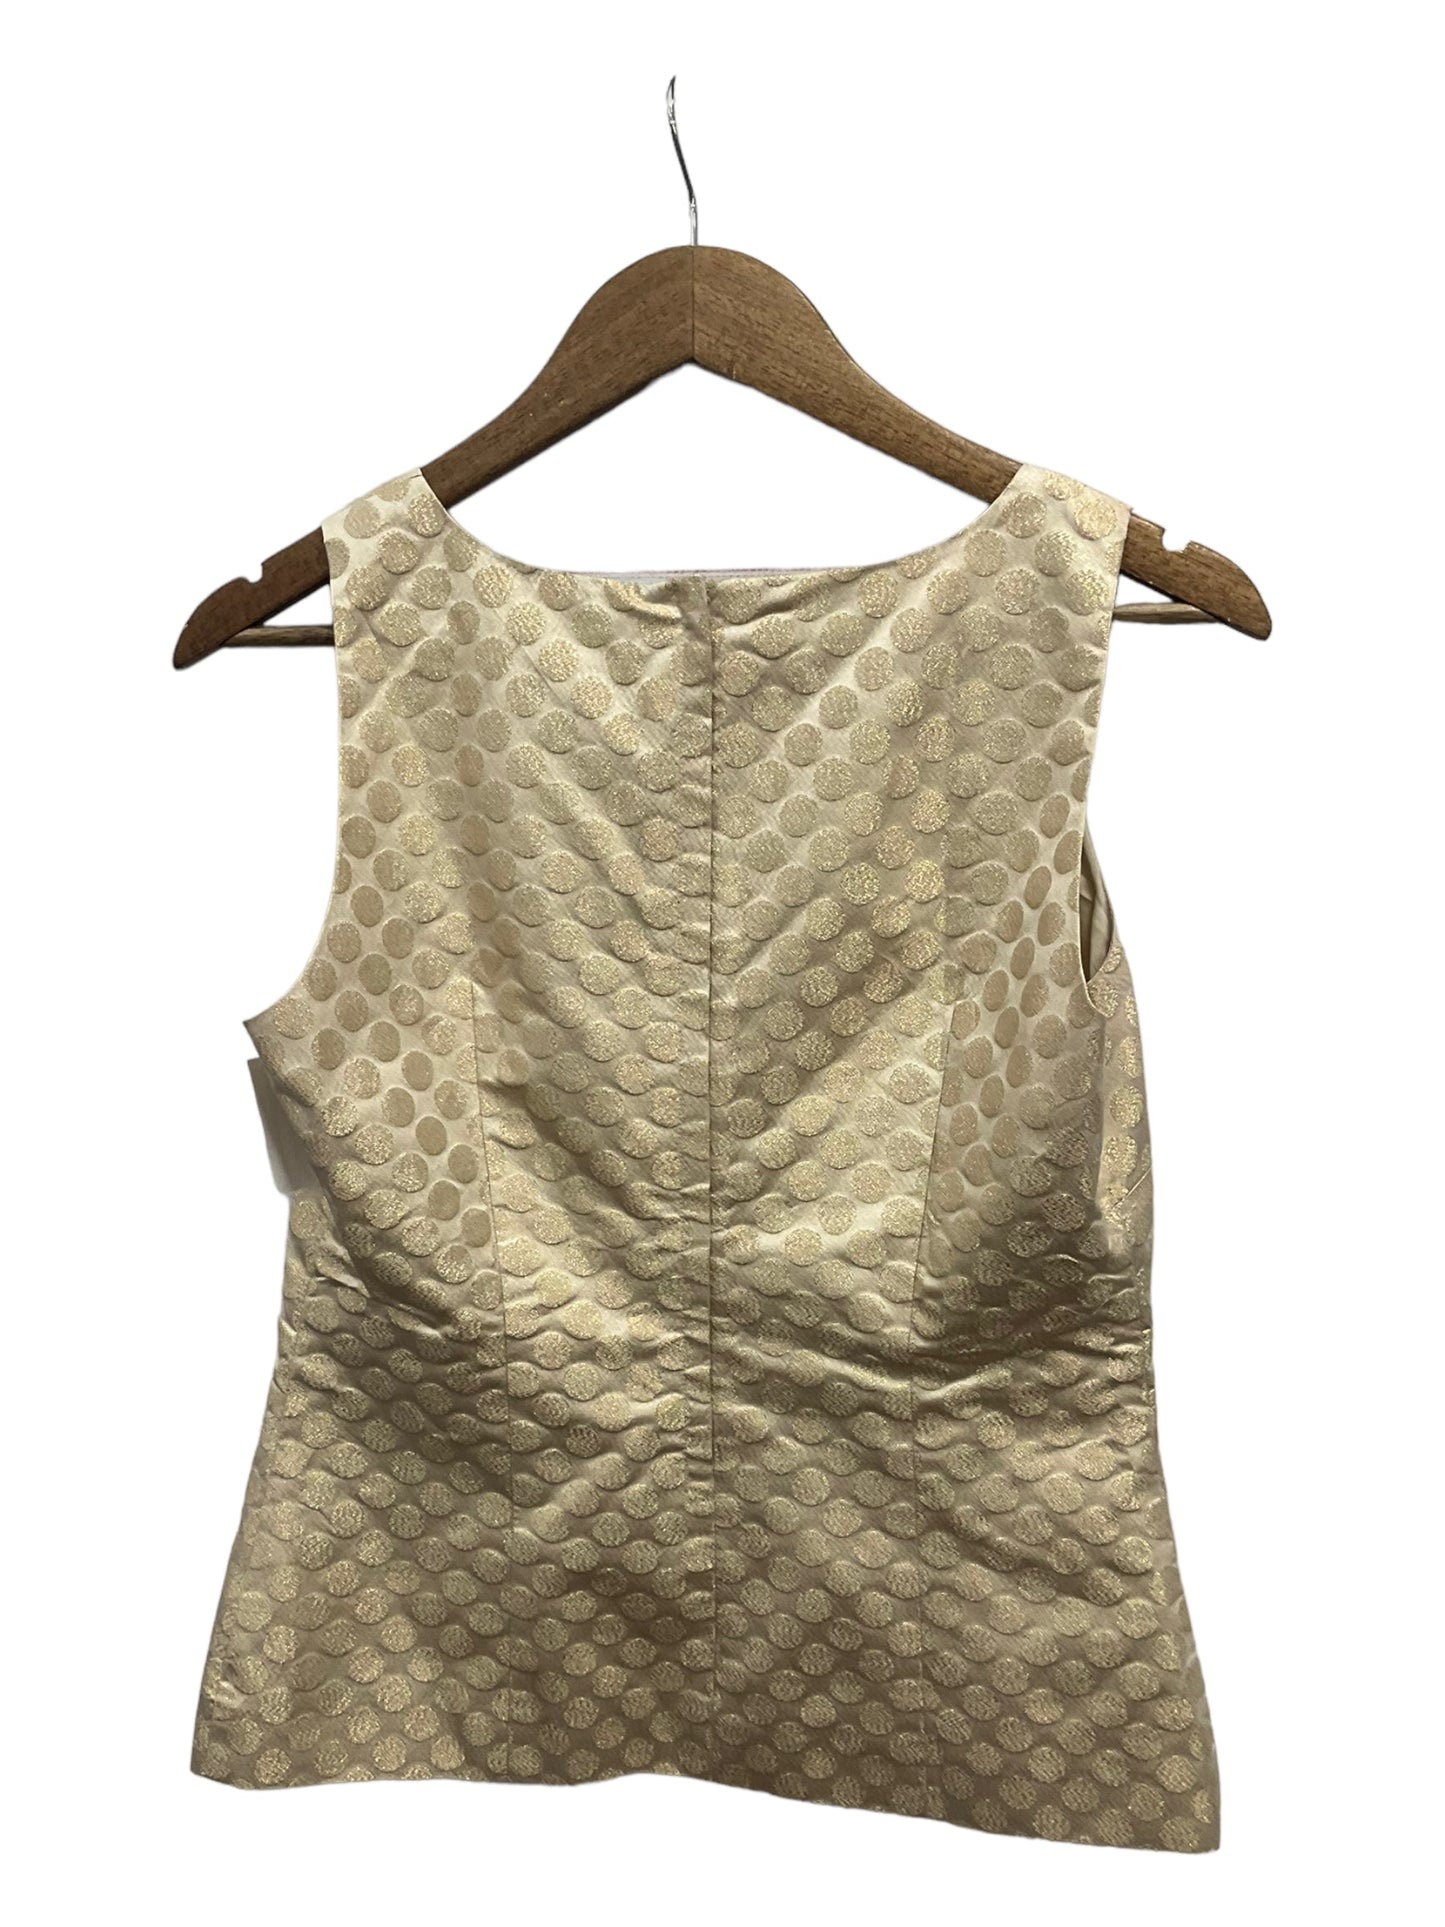 Top Sleeveless By J Crew  Size: M